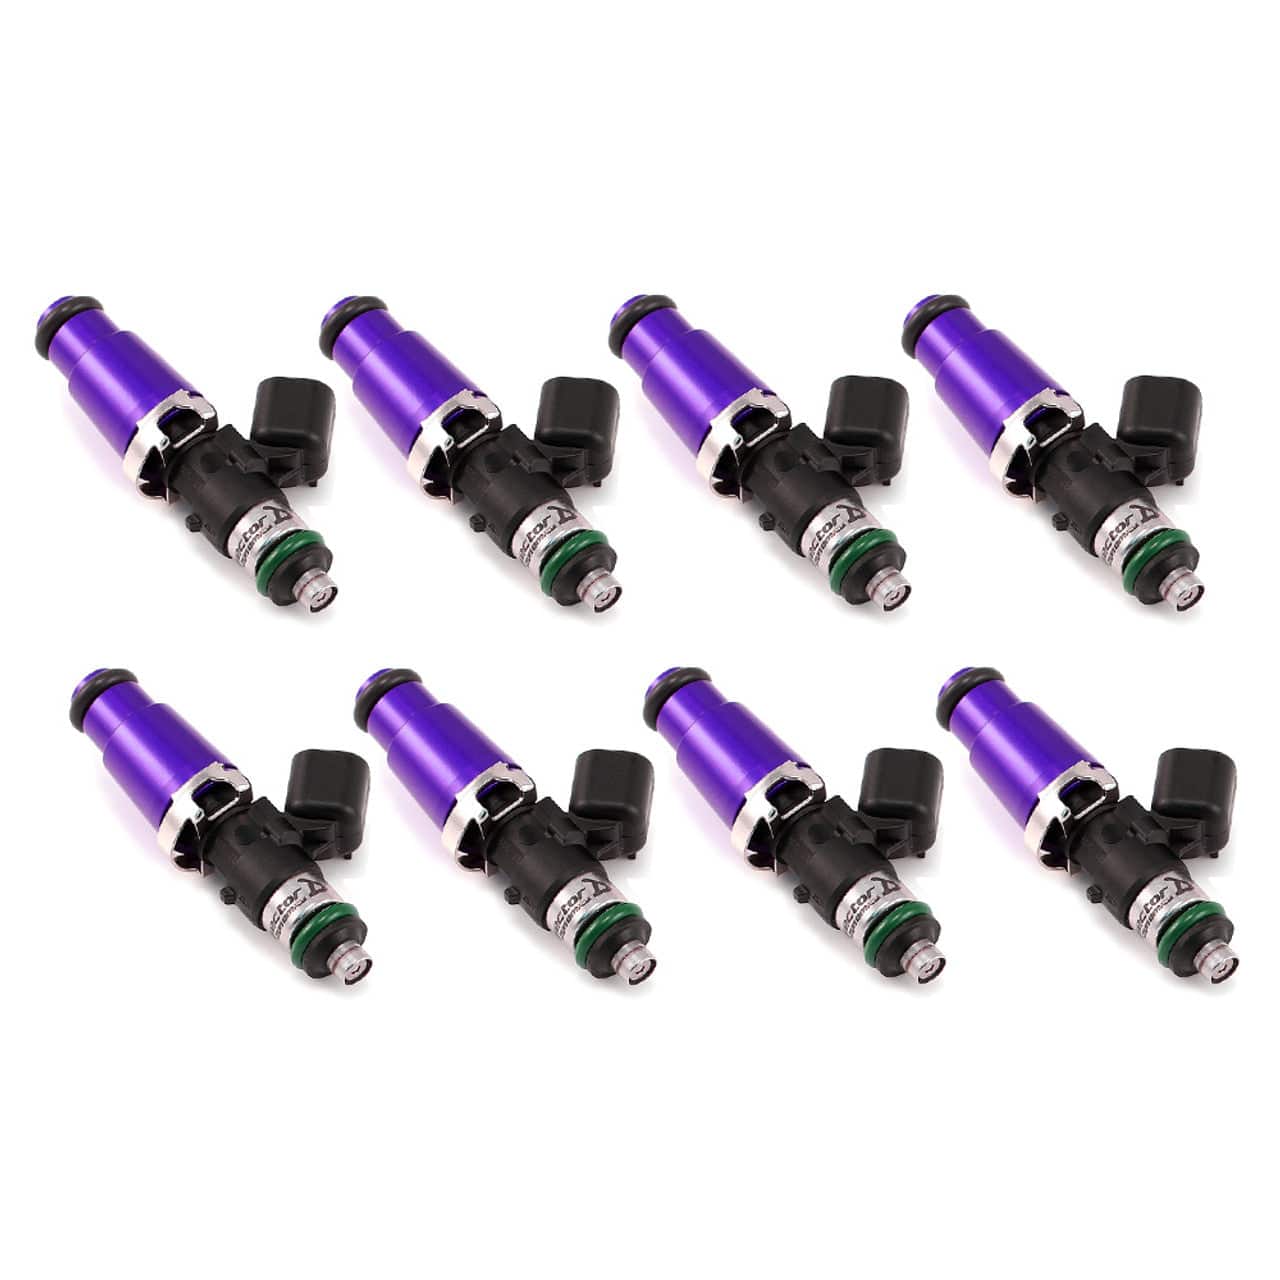 Injector Dynamics ID2600-XDS, for BMW E90 / E92 / E93 M3 2007+, 14mm (grey) adapter top. Set of 8.